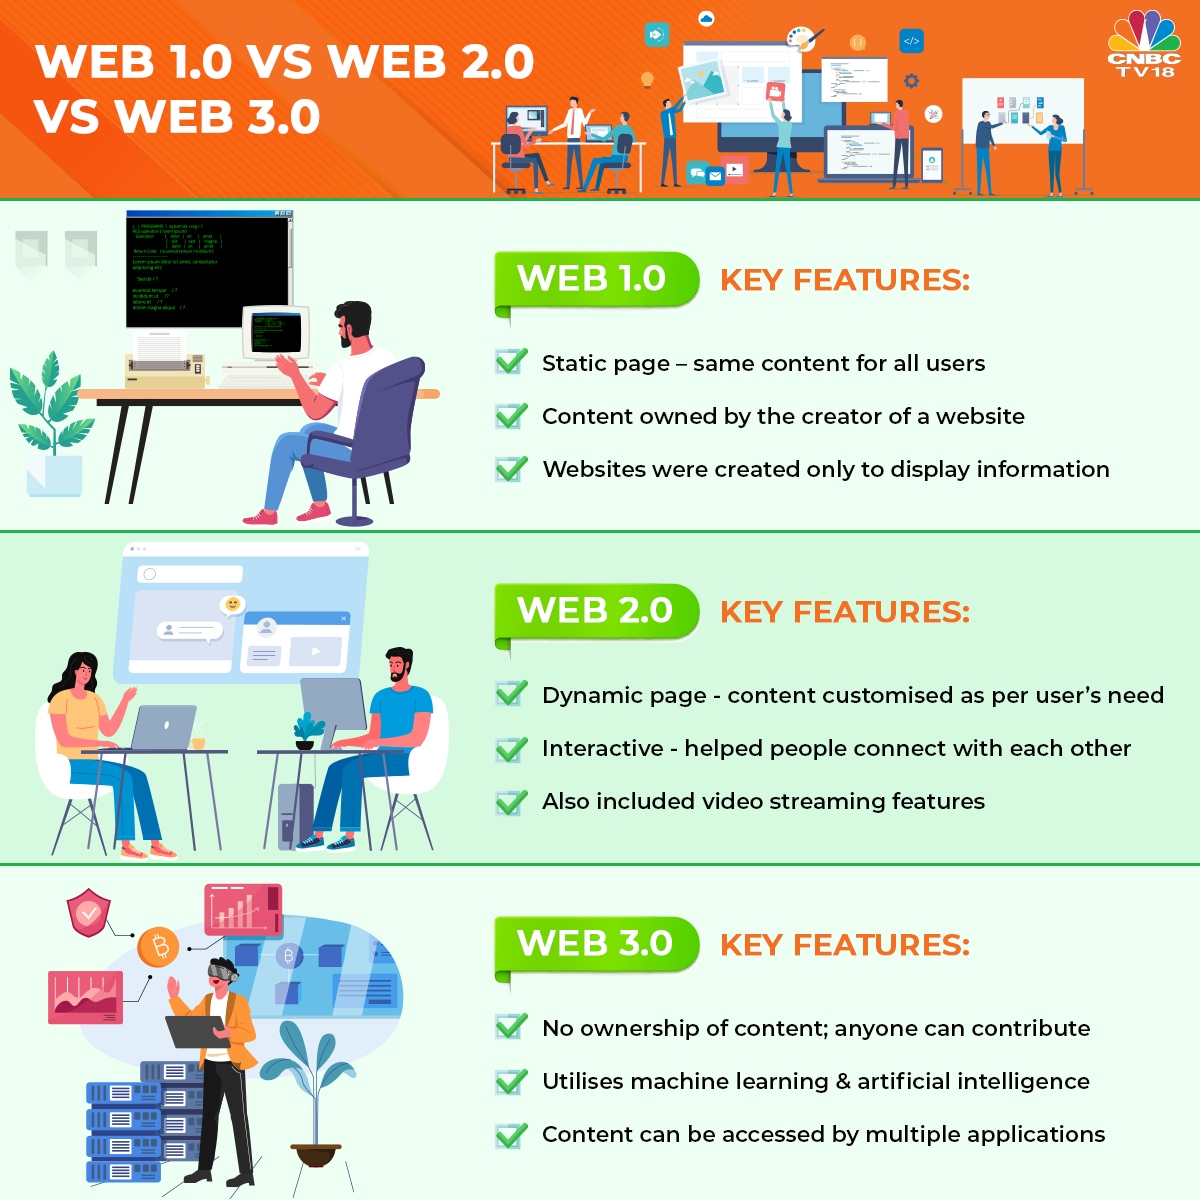 Is Web 1.0 also known as static page?